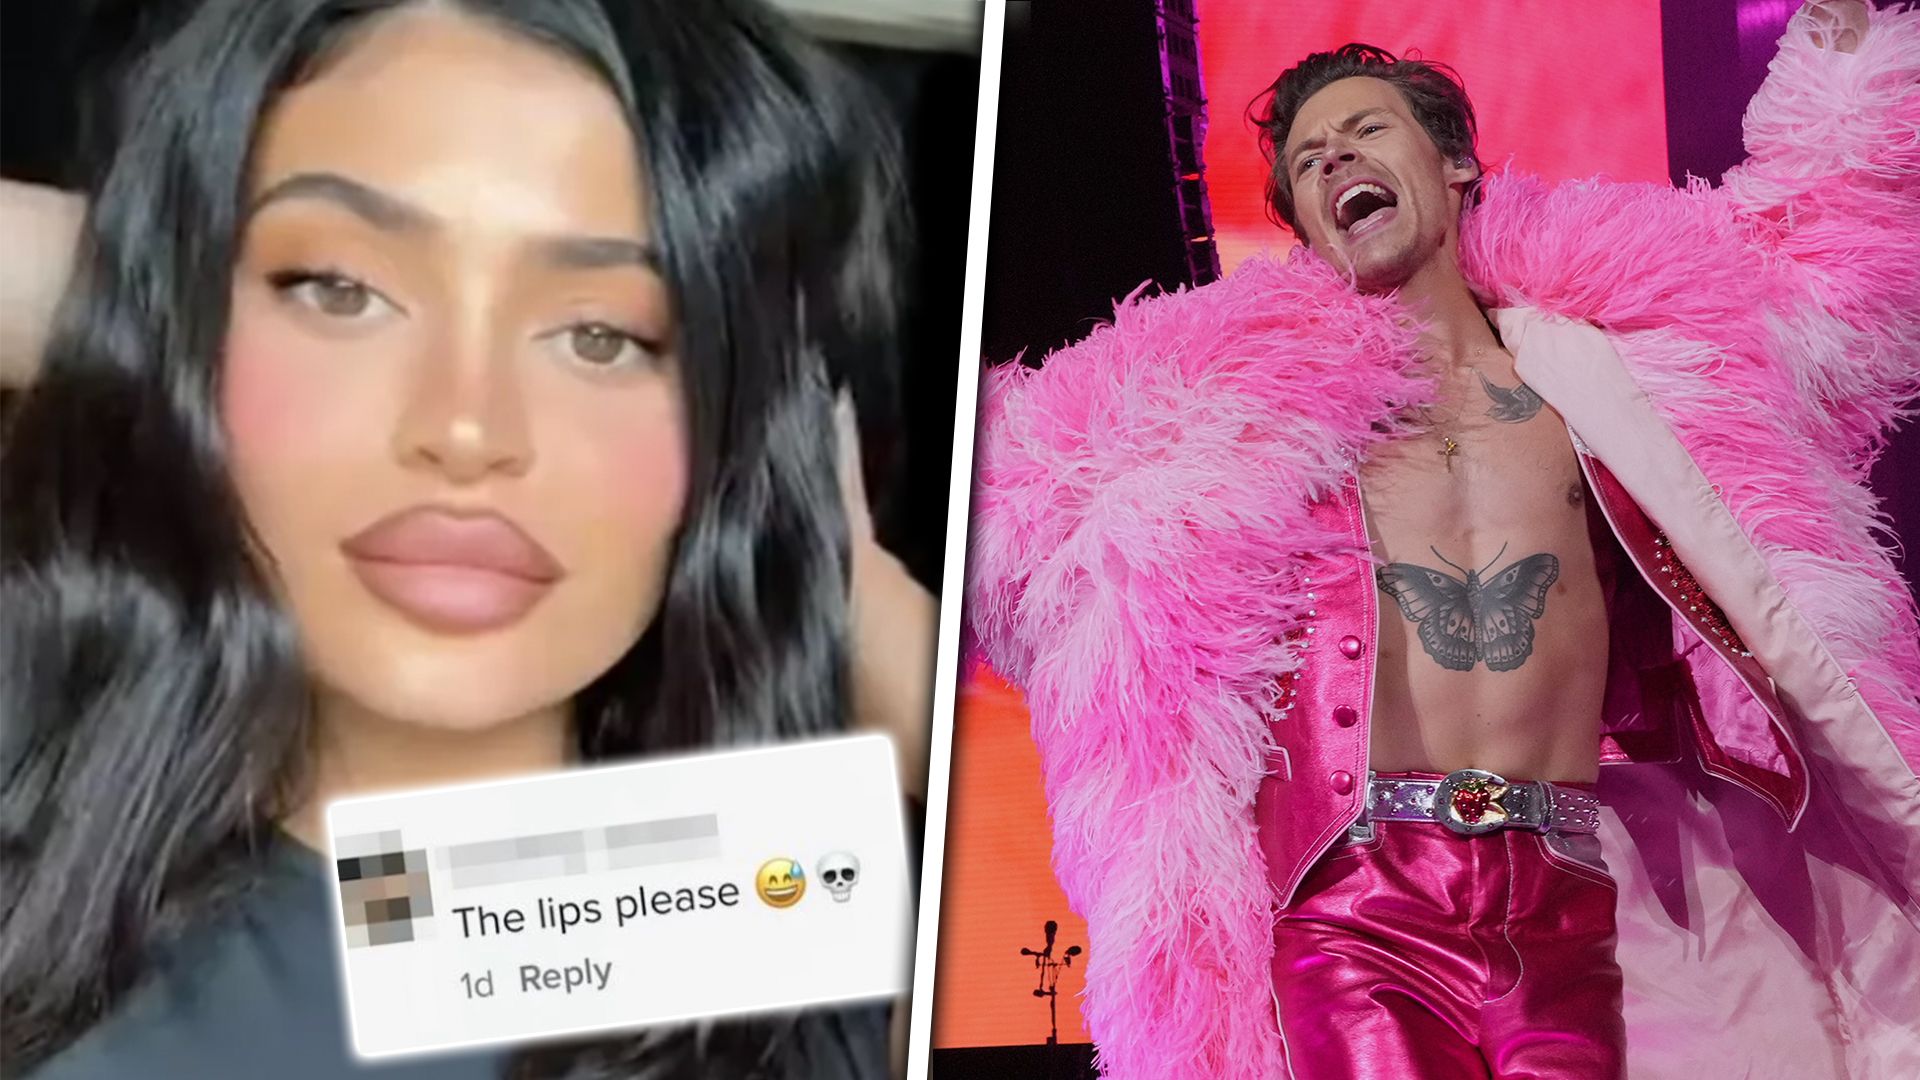 Kylie Jenner Has Gotten The Whole Of TikTok Hooked On This Dior Blush